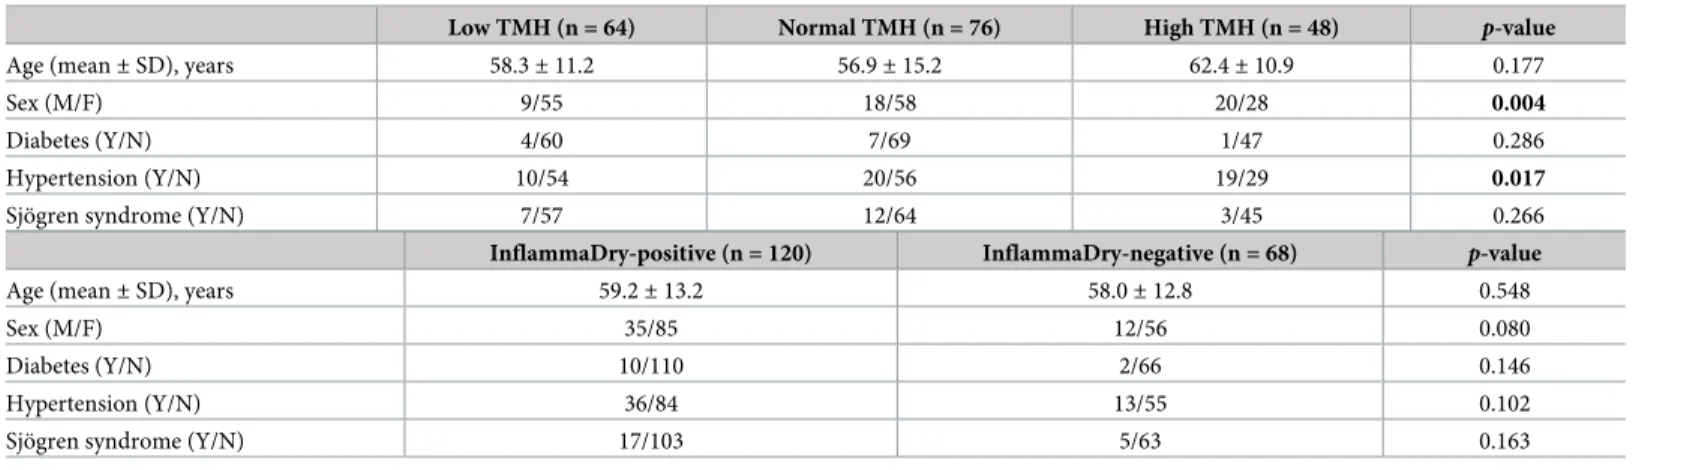 Table 1. Patient demographics of TMH groups and InflammaDry positivity groups.